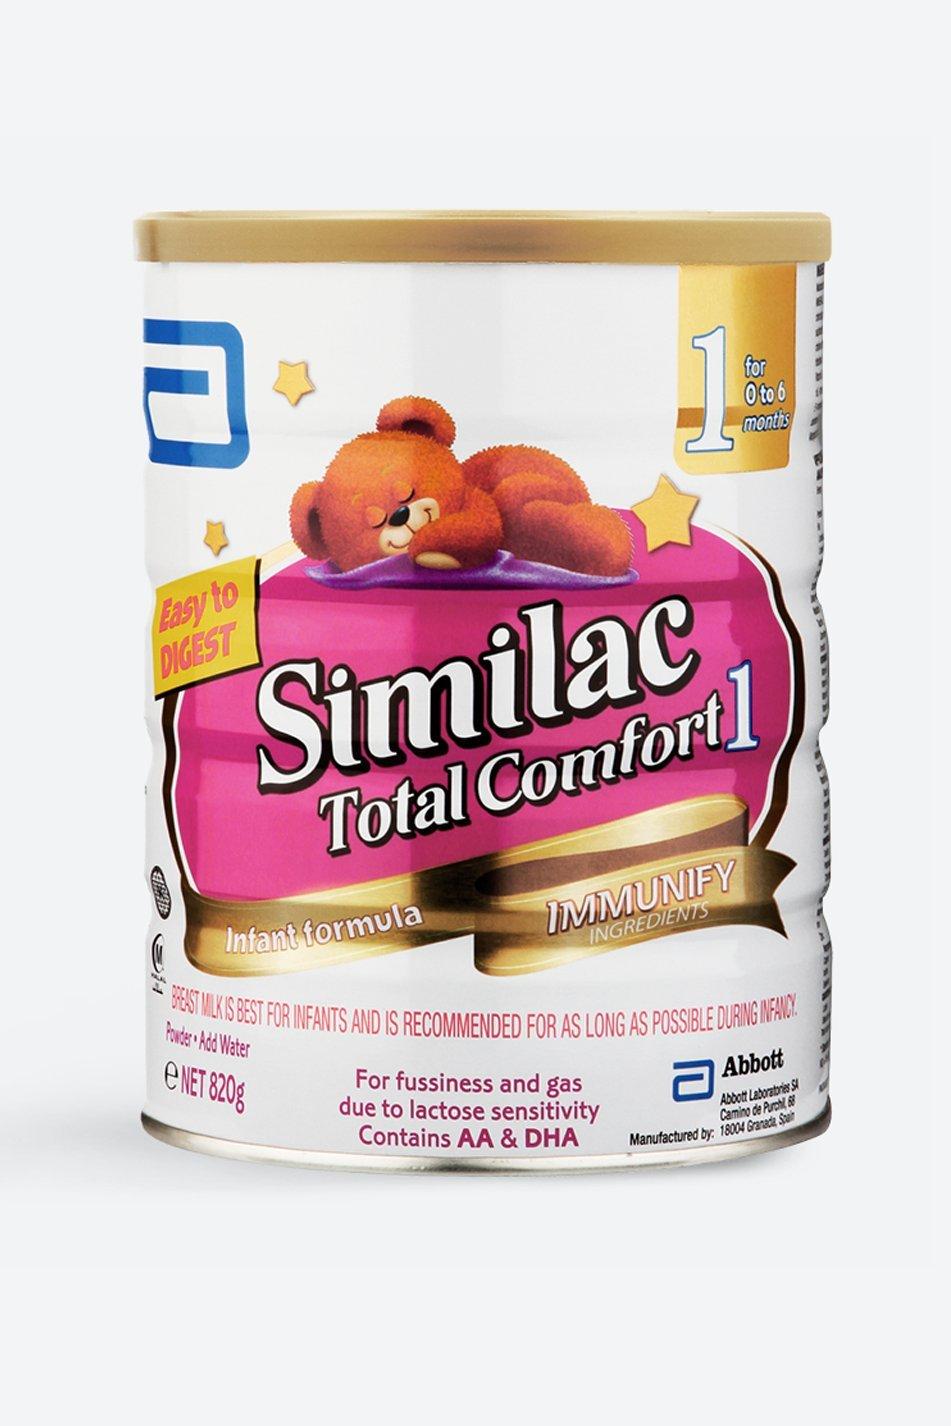 Buy Similac Total Comfort, Up to 24 Months Infants Online at Best Price